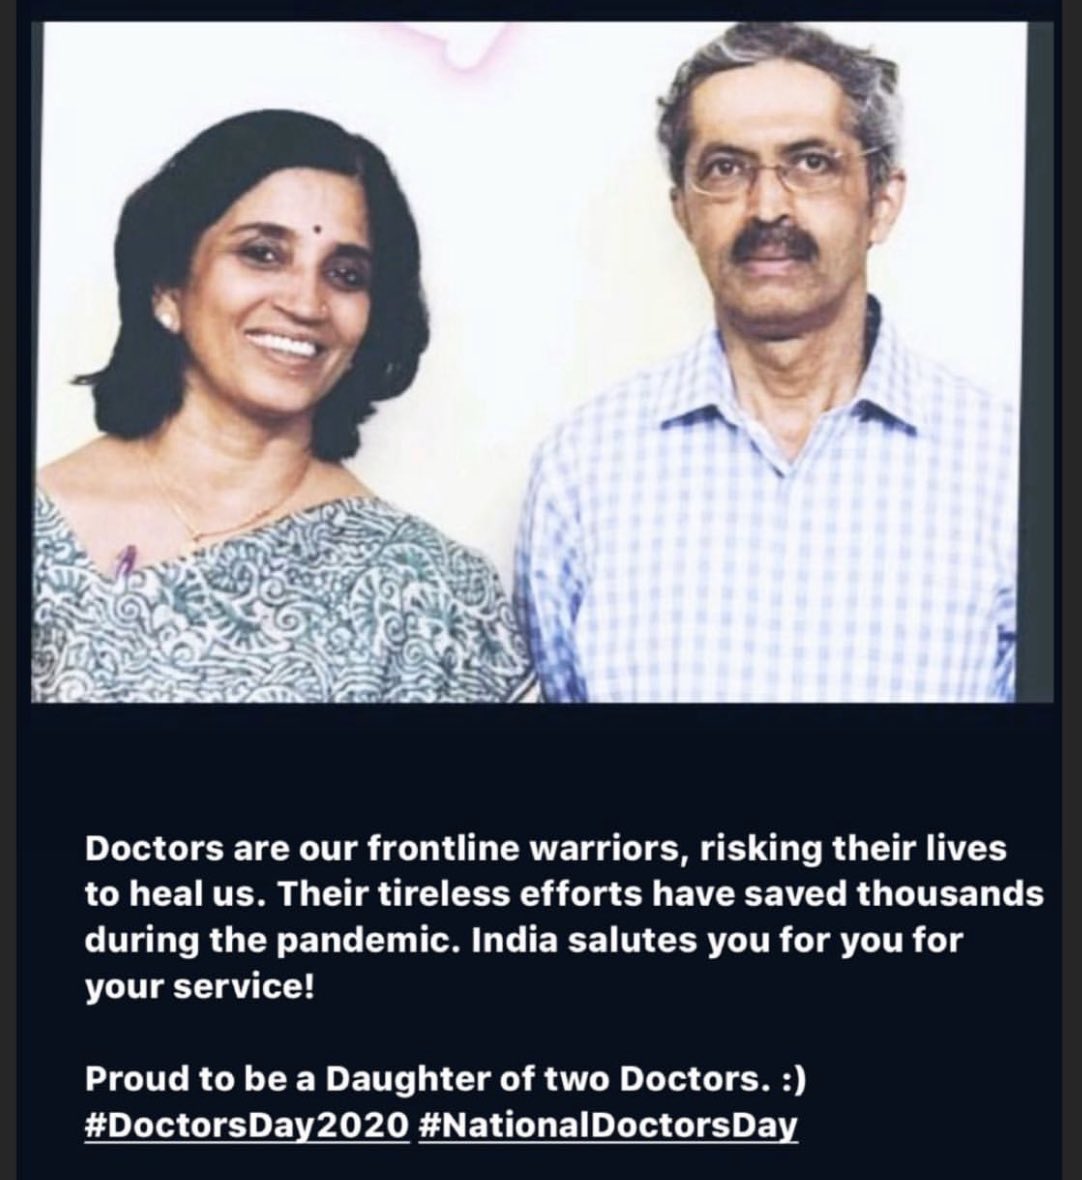 Happy Doctors day amma and appa 🙏🏻
Still learning to be as selfless and humble as you both are ❤️🙏🏻

#ThankYouDoctors #doctorslife #HappyDoctorsDay #HappyDoctorsDay2021 #NationalDoctorsDay